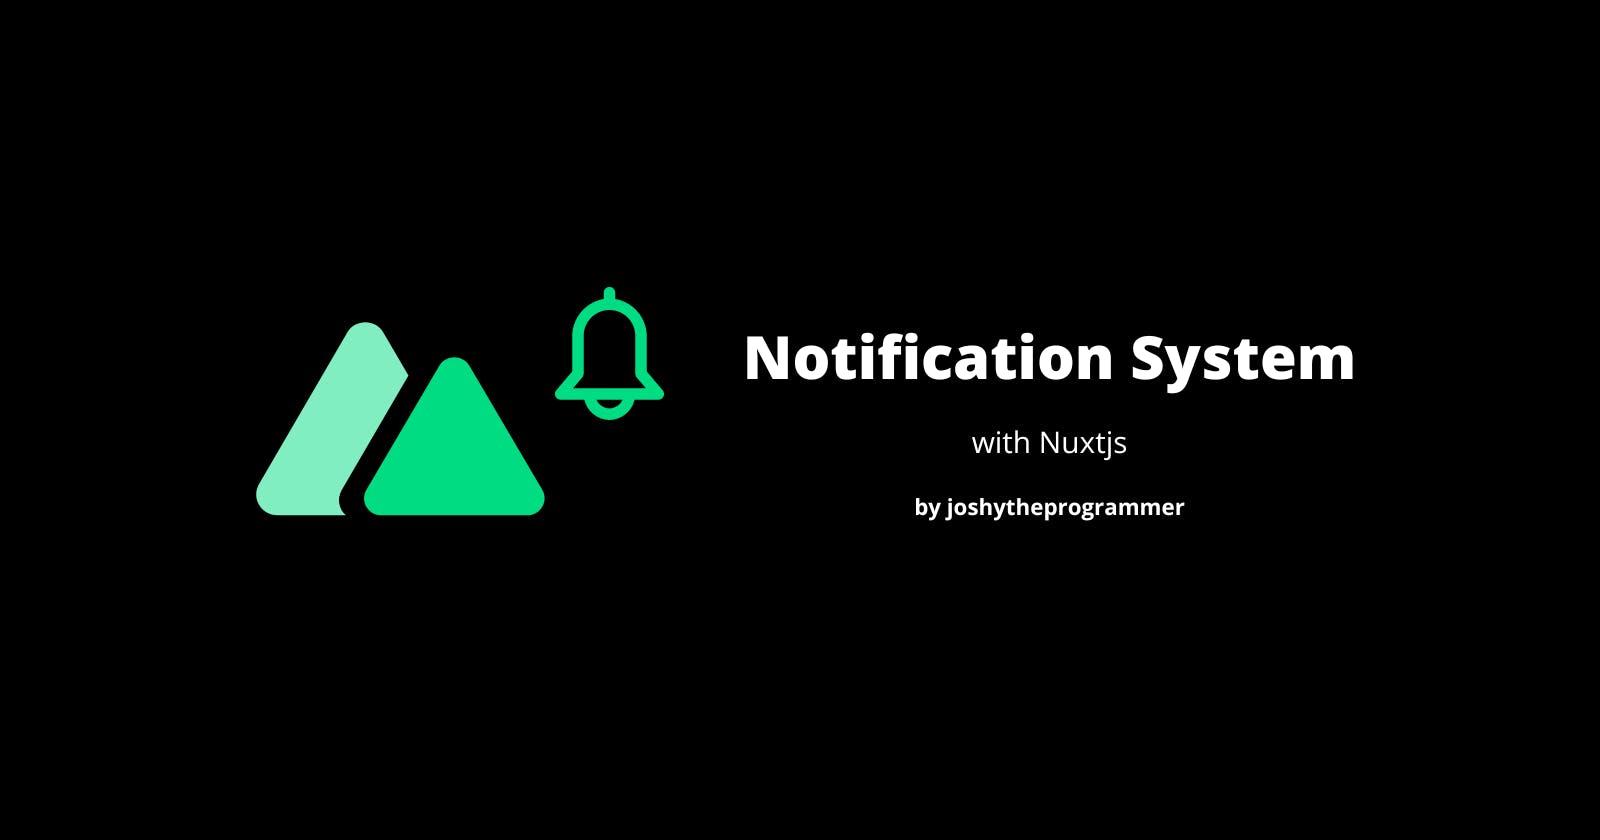 Let's Build - A Notification System in Nuxtjs